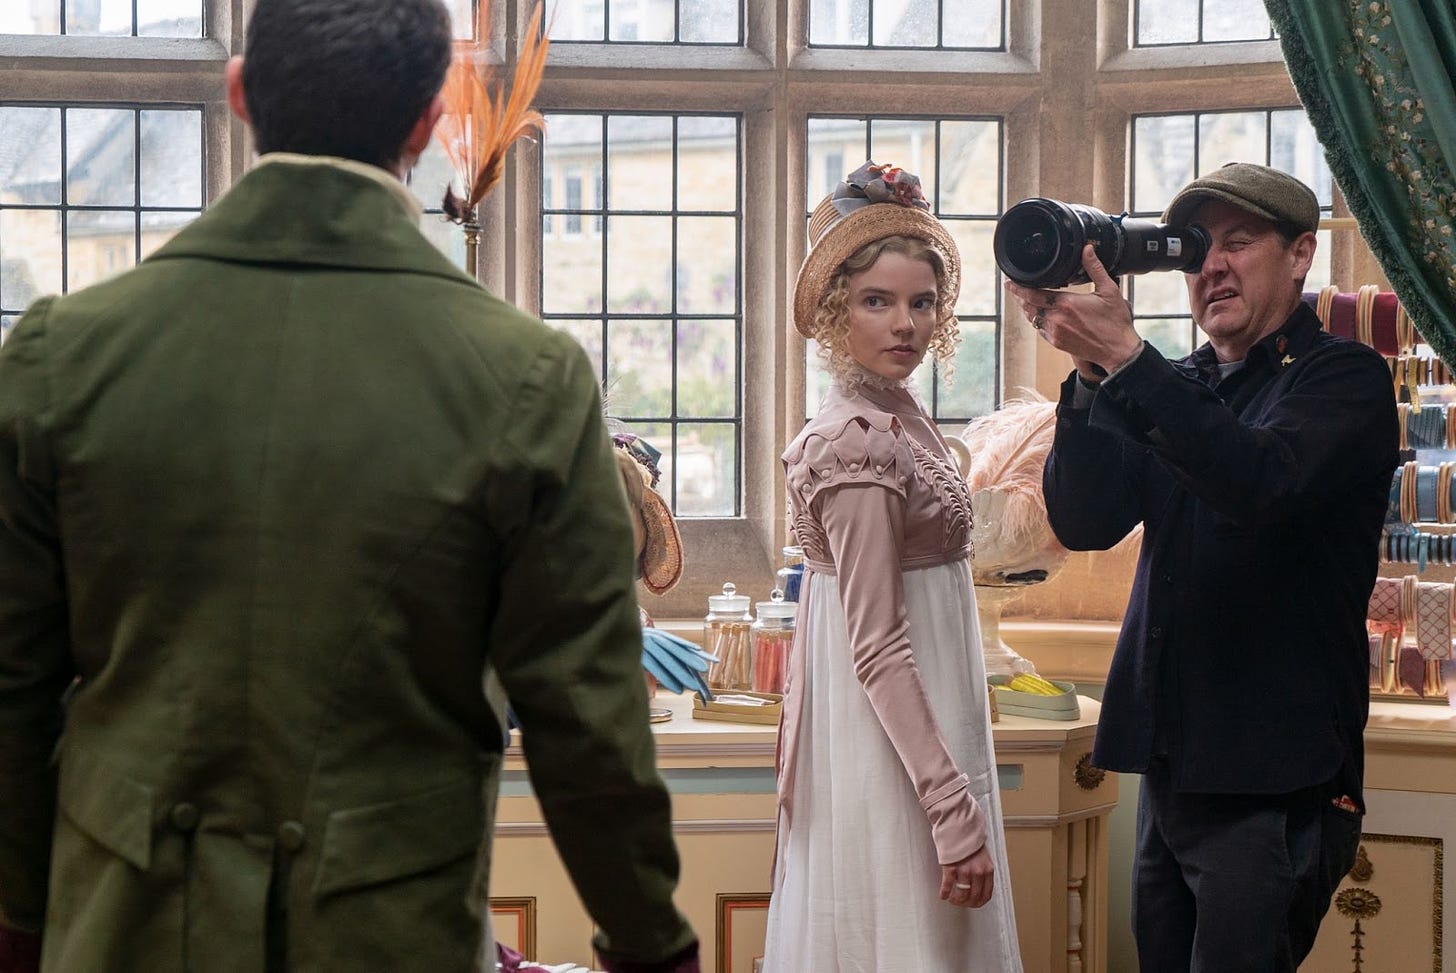 Photo shows actress Anya Taylor-Joy in Regency gown, surrounded by a cameraman on the set of the 2020 film 'EMMA'. Approaching is the character of Frank Churchill, shown from the back. 